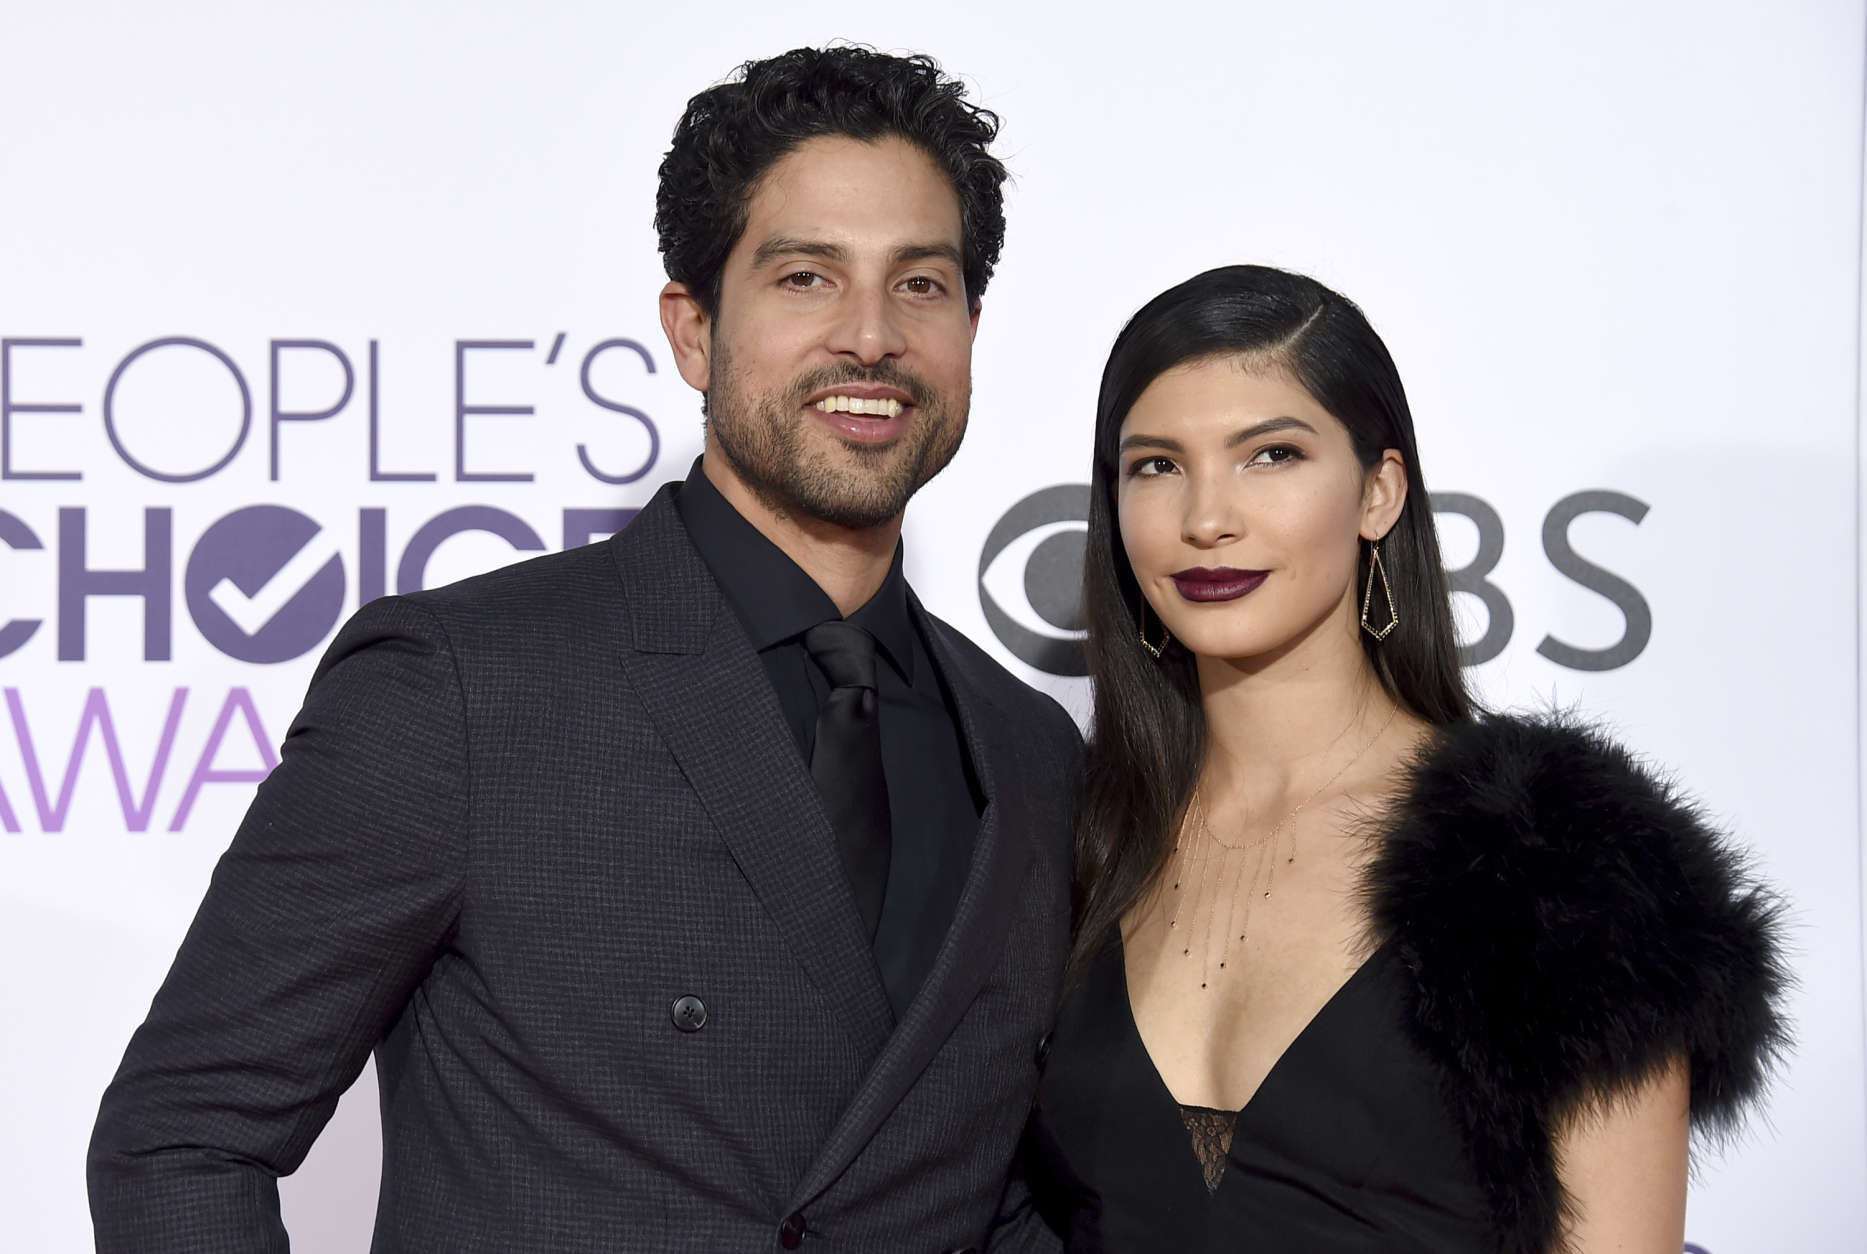 Adam Rodriguez, left, and Grace Gail arrive at the People's Choice Awards at the Microsoft Theater on Wednesday, Jan. 18, 2017, in Los Angeles. (Photo by Jordan Strauss/Invision/AP)